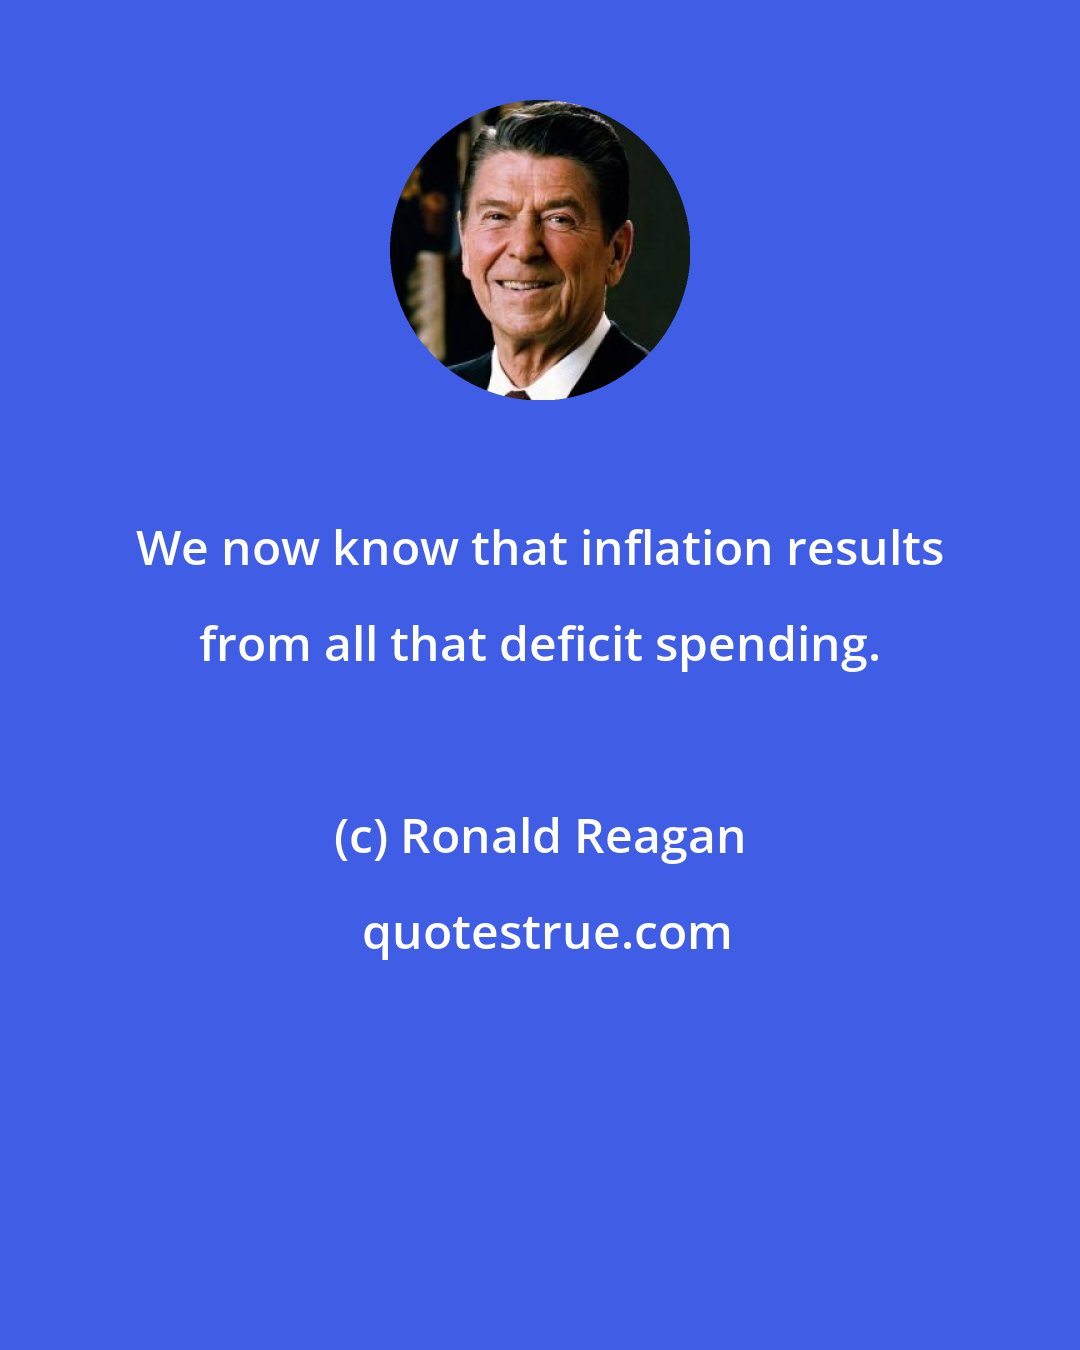 Ronald Reagan: We now know that inflation results from all that deficit spending.